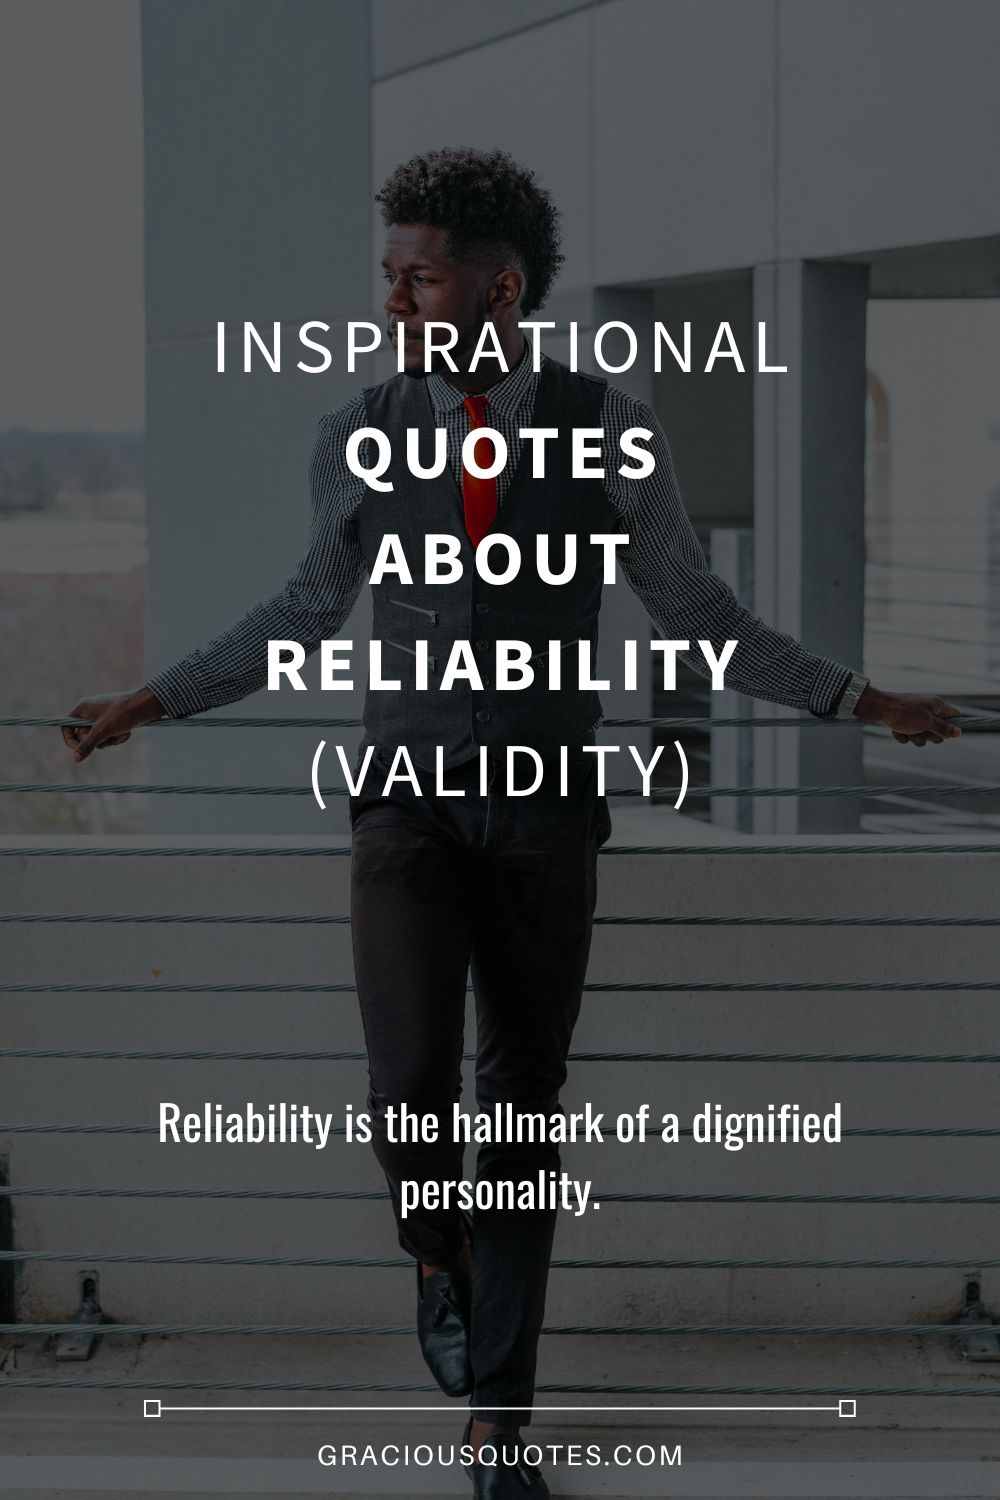 Inspirational Quotes About Reliability (VALIDITY) - Gracious Quotes